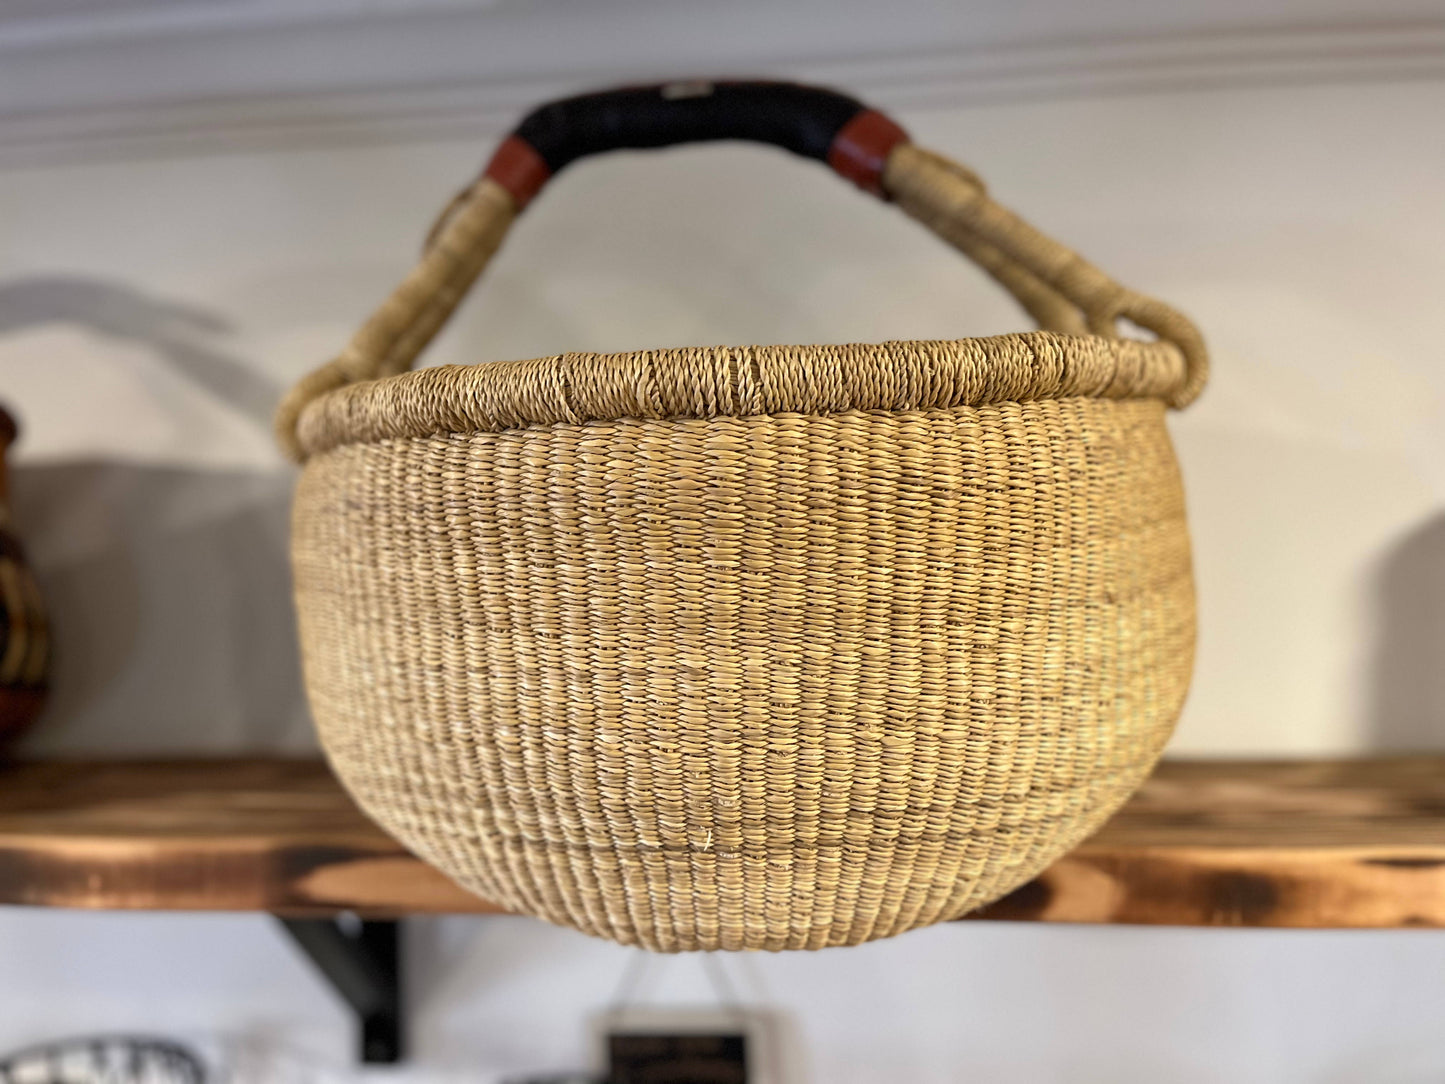 Large Woven Baskets Made in Ghana